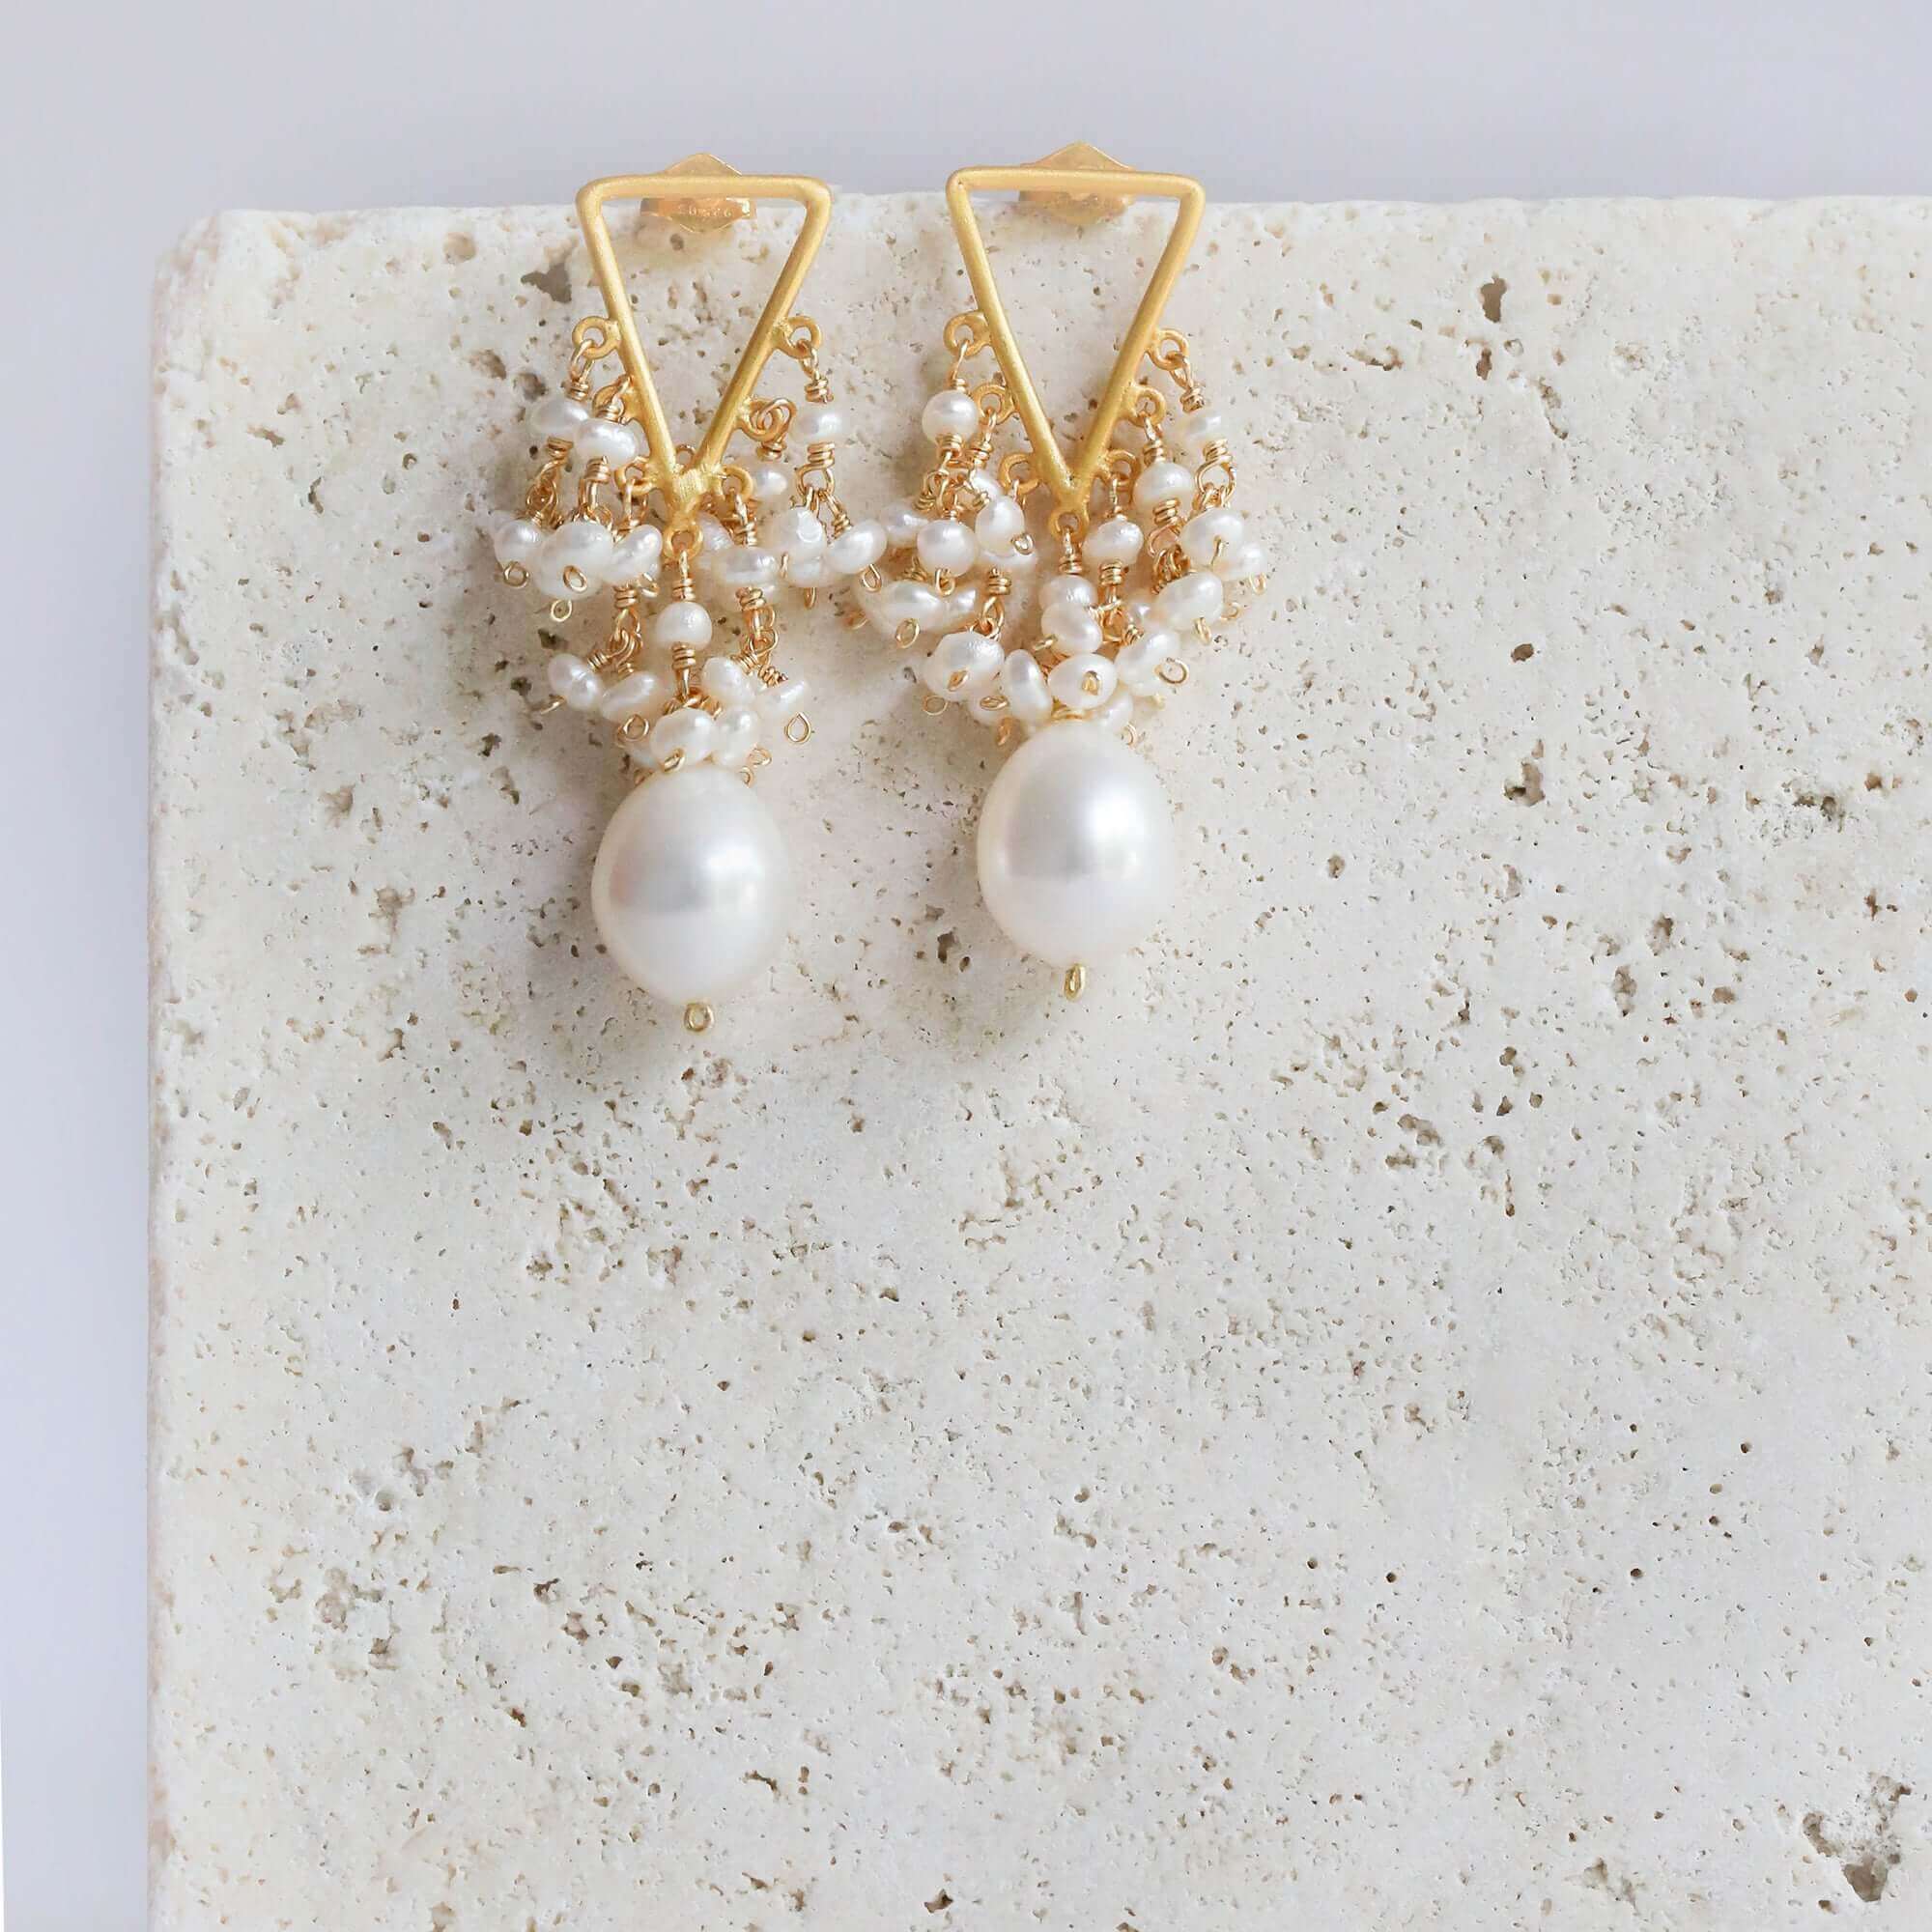 Gold Earrings featuring beautiful white freshwater pearls